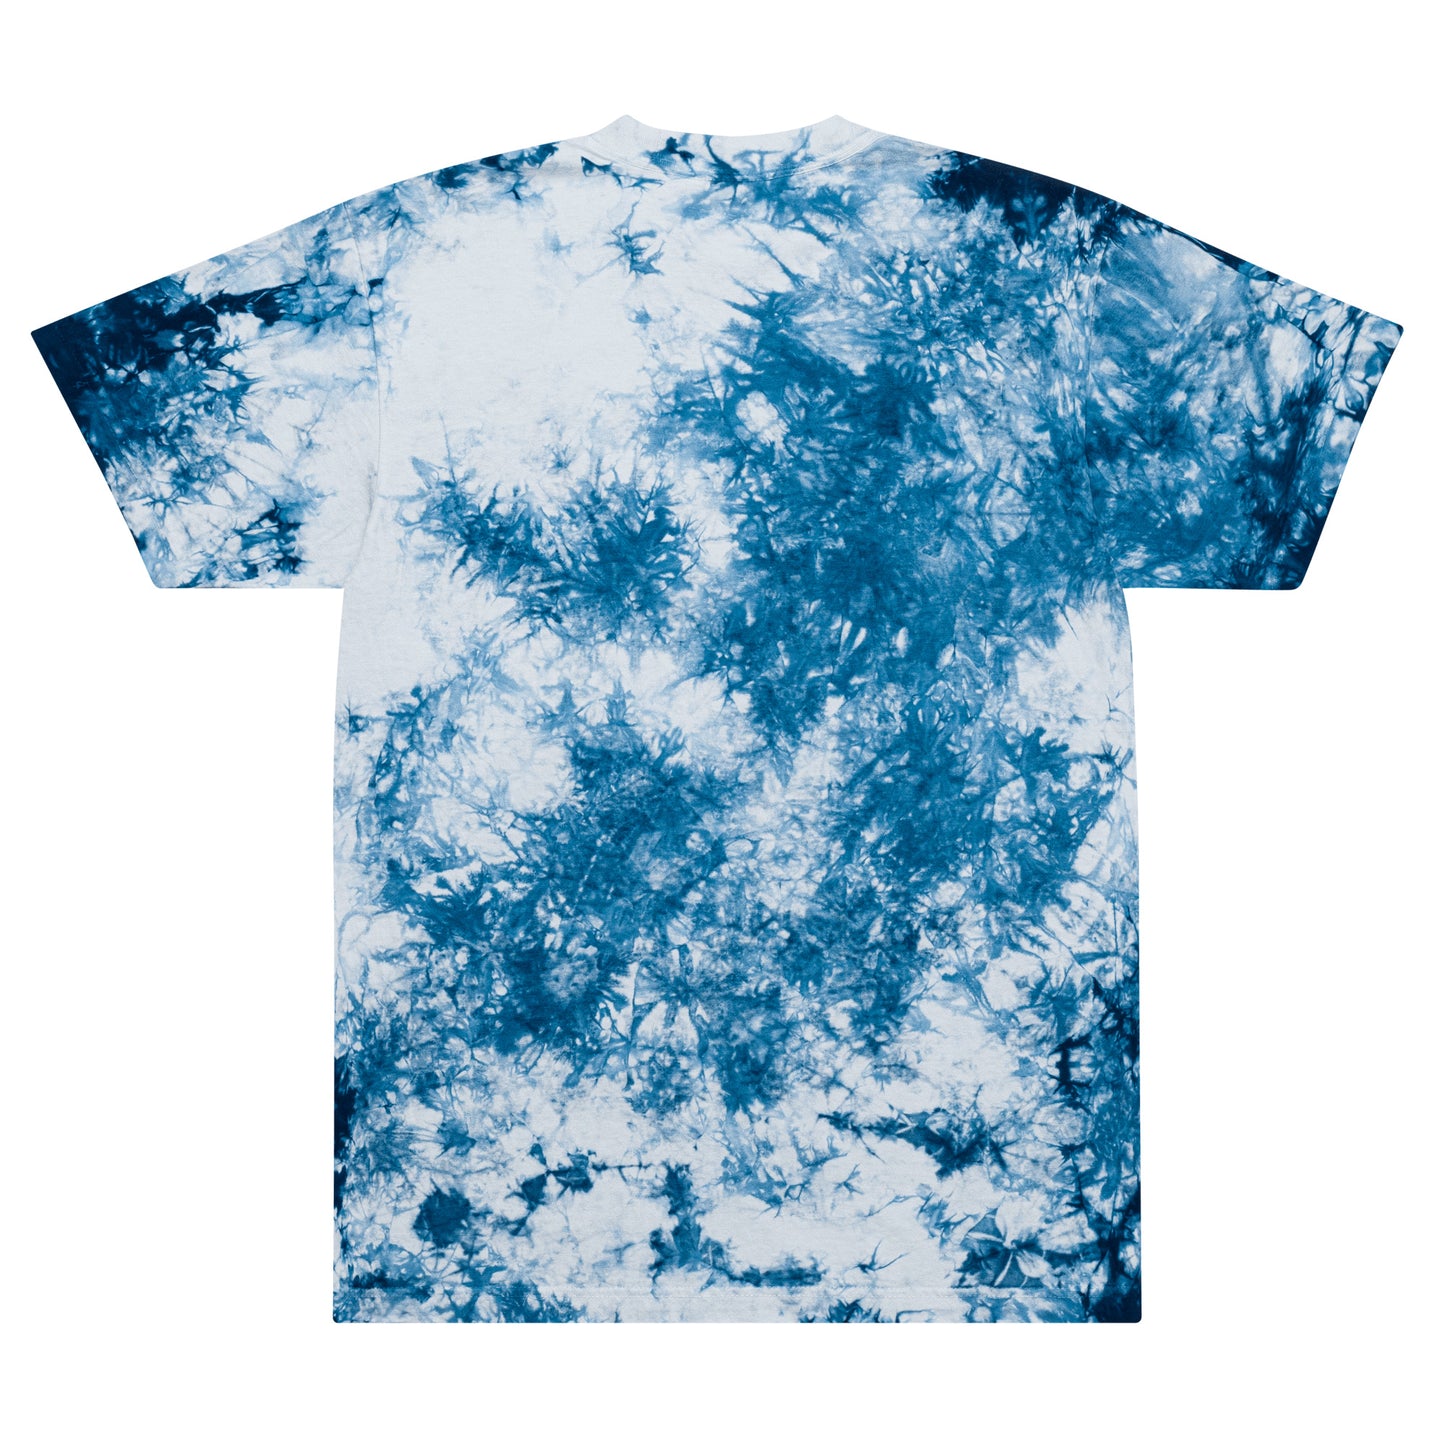 T-shirt Adult Unisex Oversized Tie-Dye You Matter Embroidered Tee